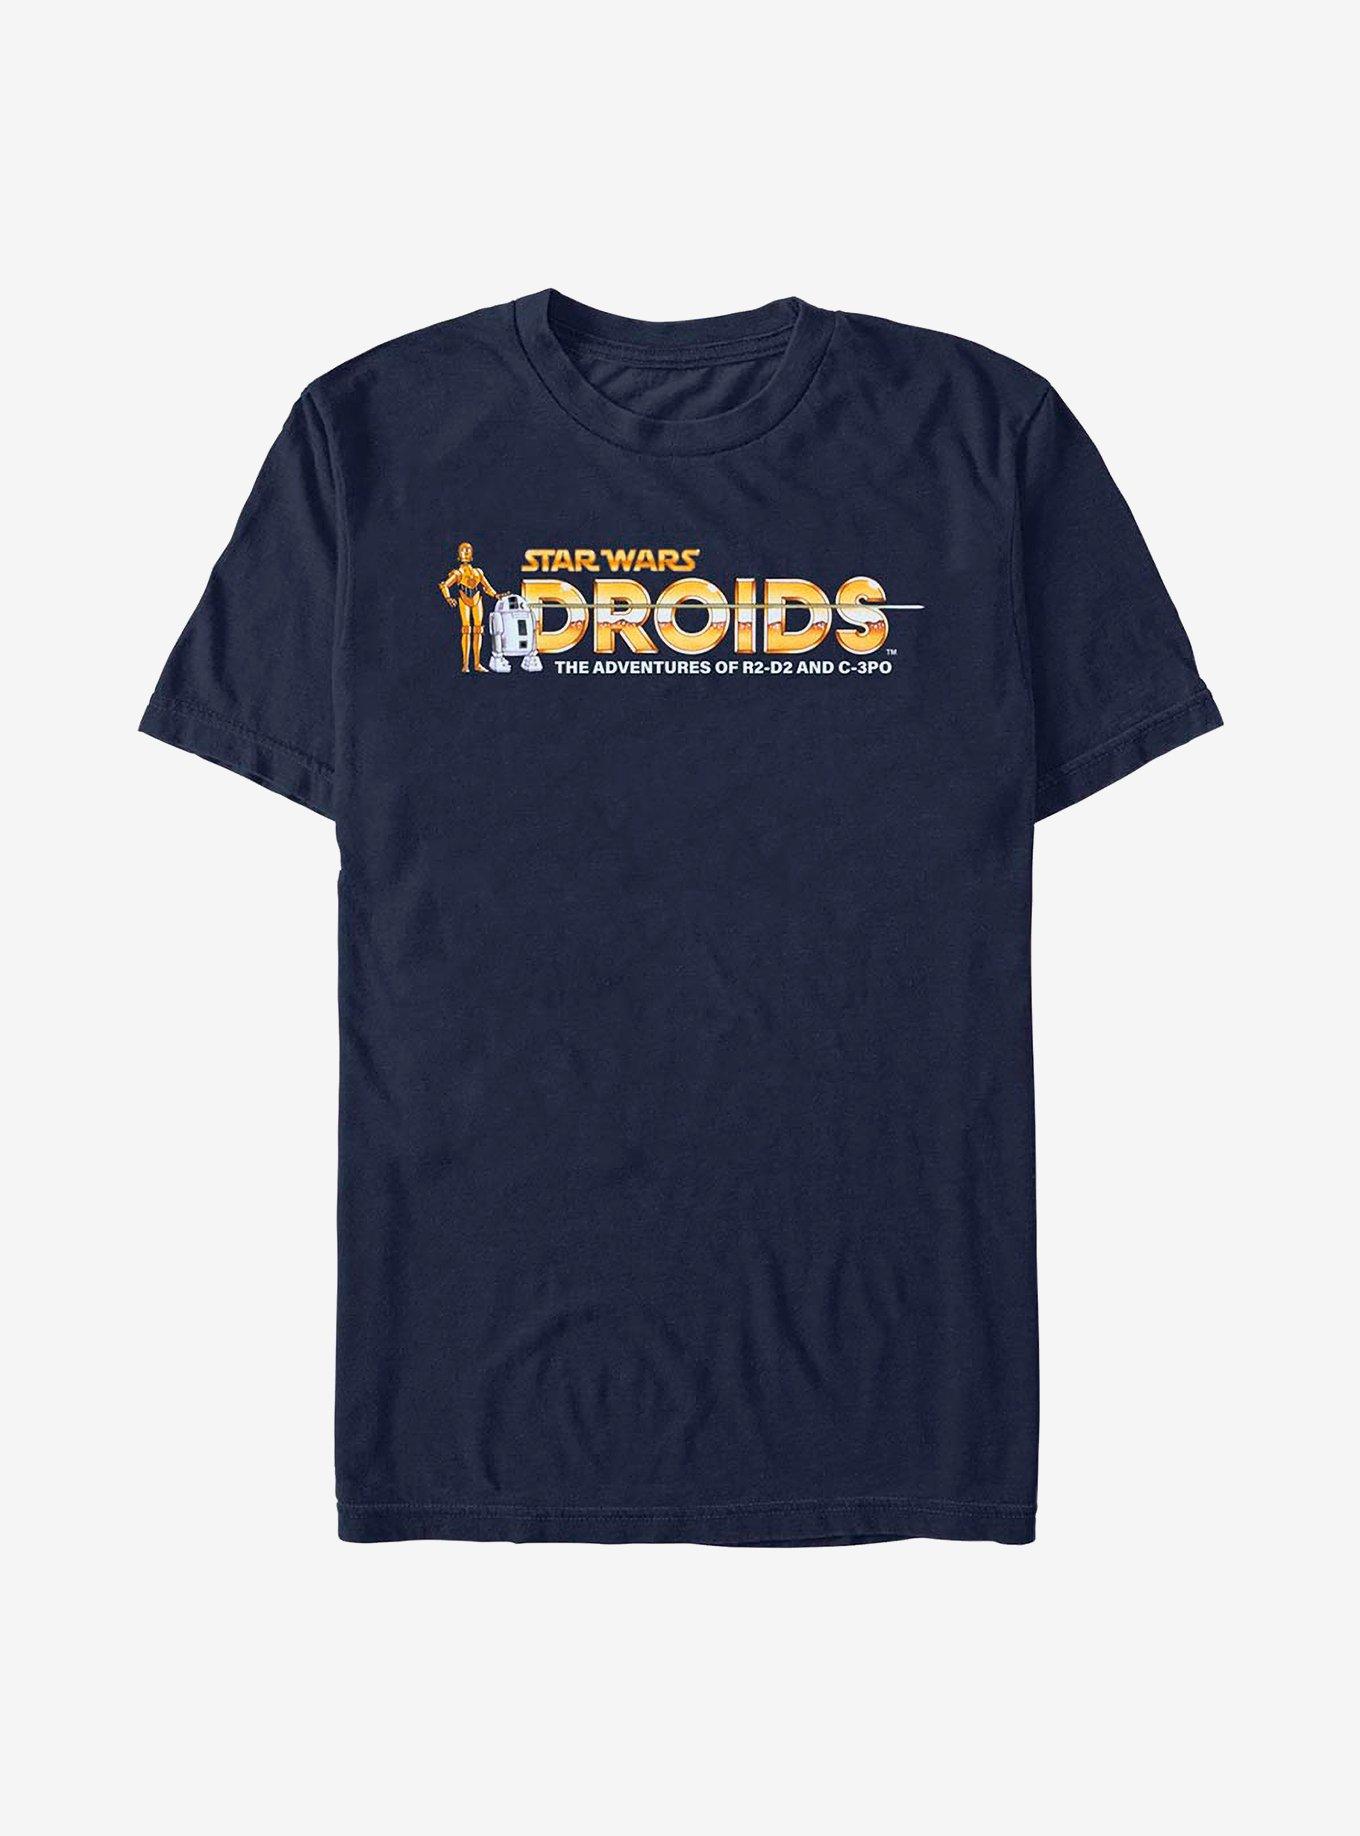 Star Wars Droids The Adventures Of R2-D2 And C-3PO T-Shirt, , hi-res